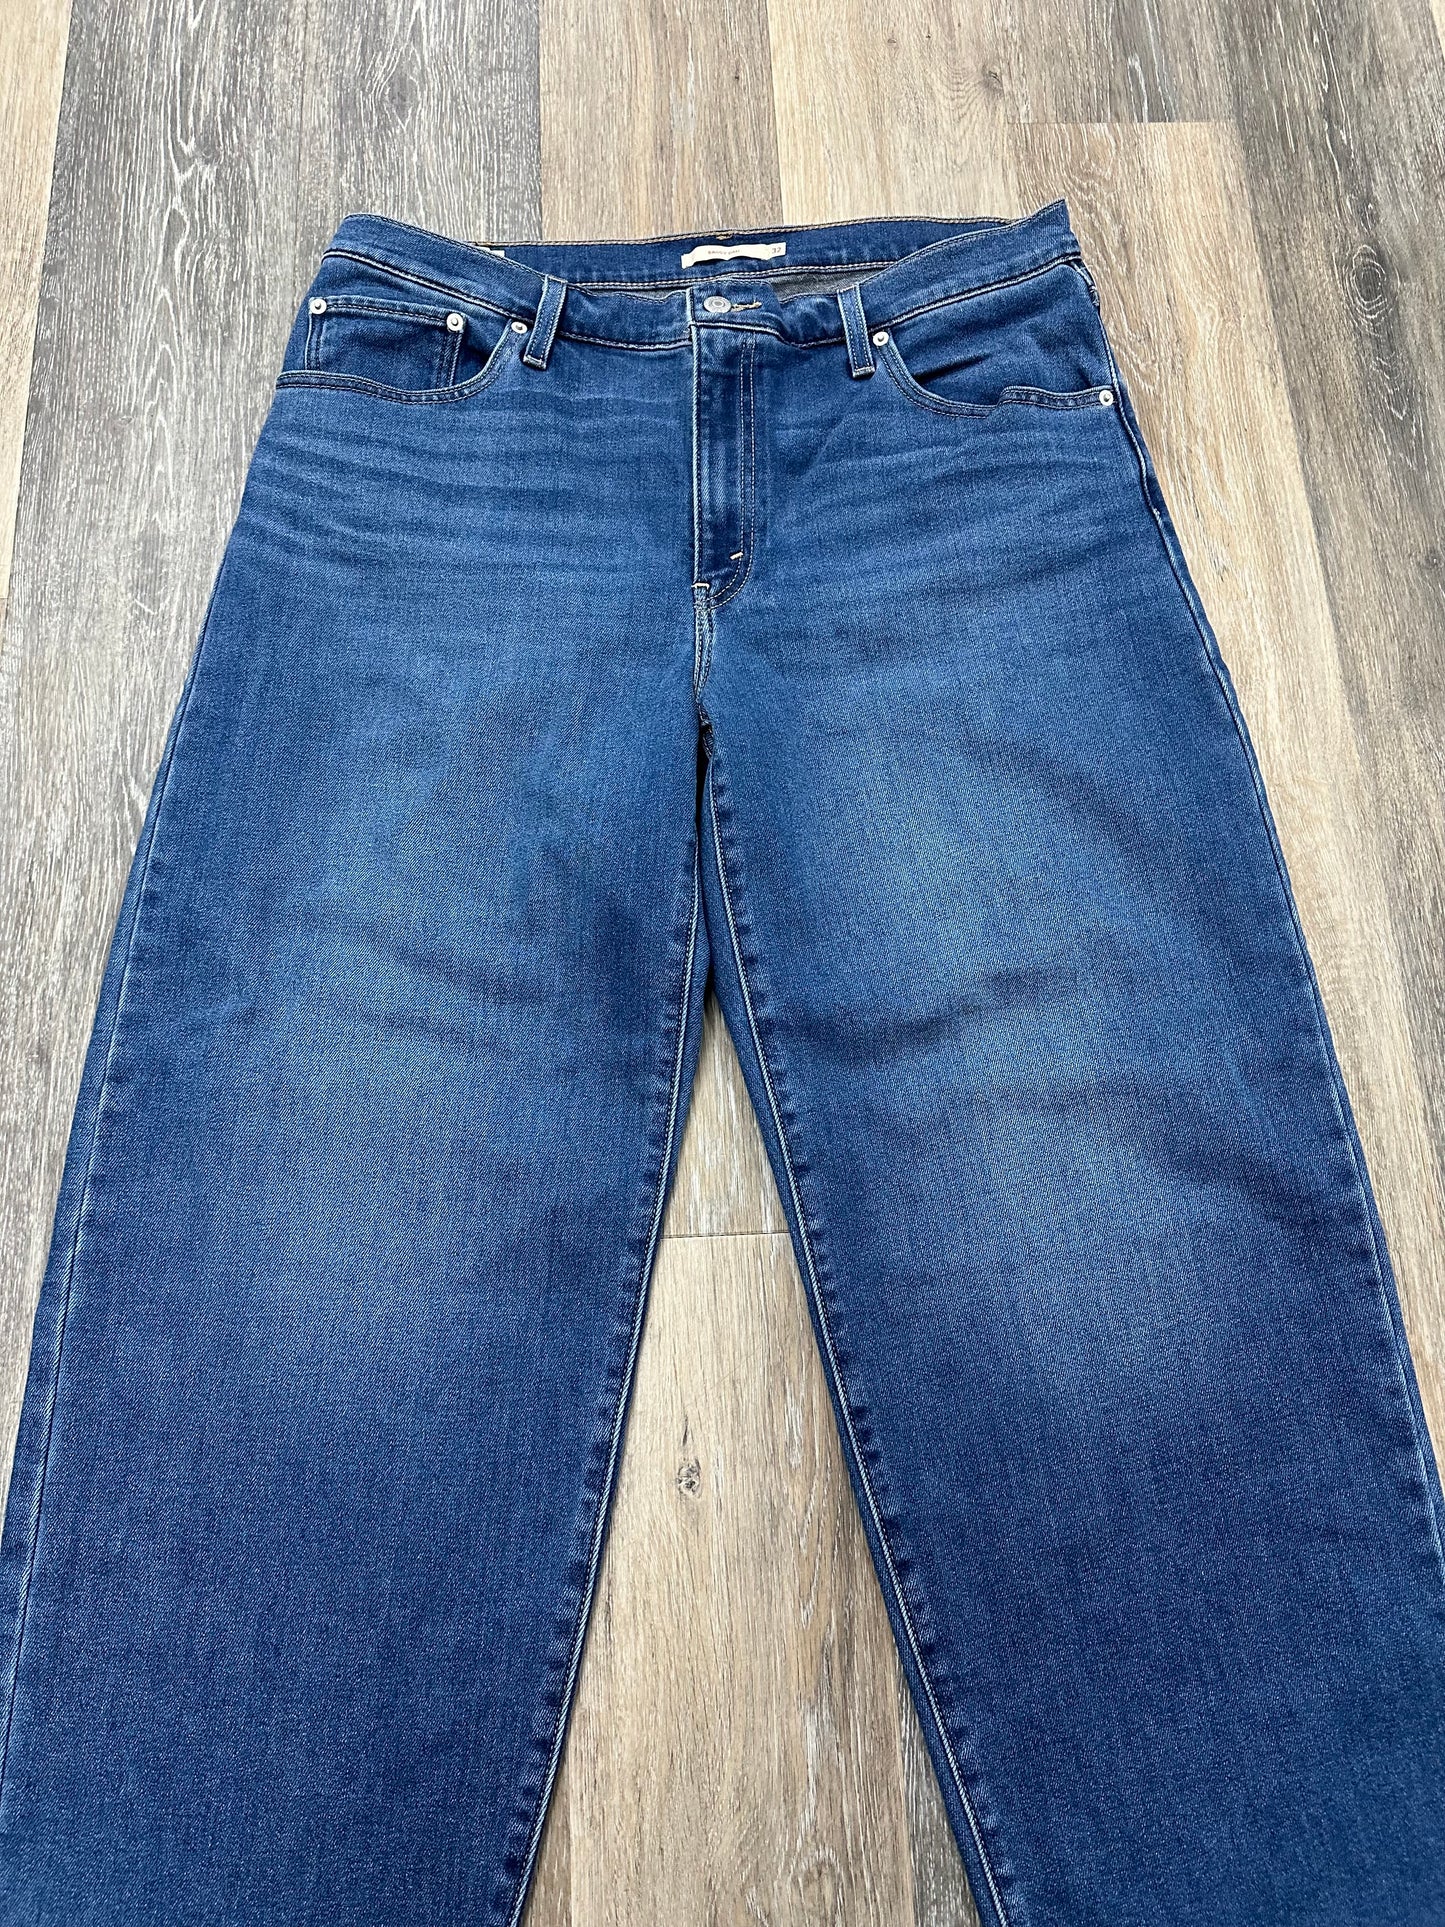 Jeans Straight By Levis  Size: 14/32